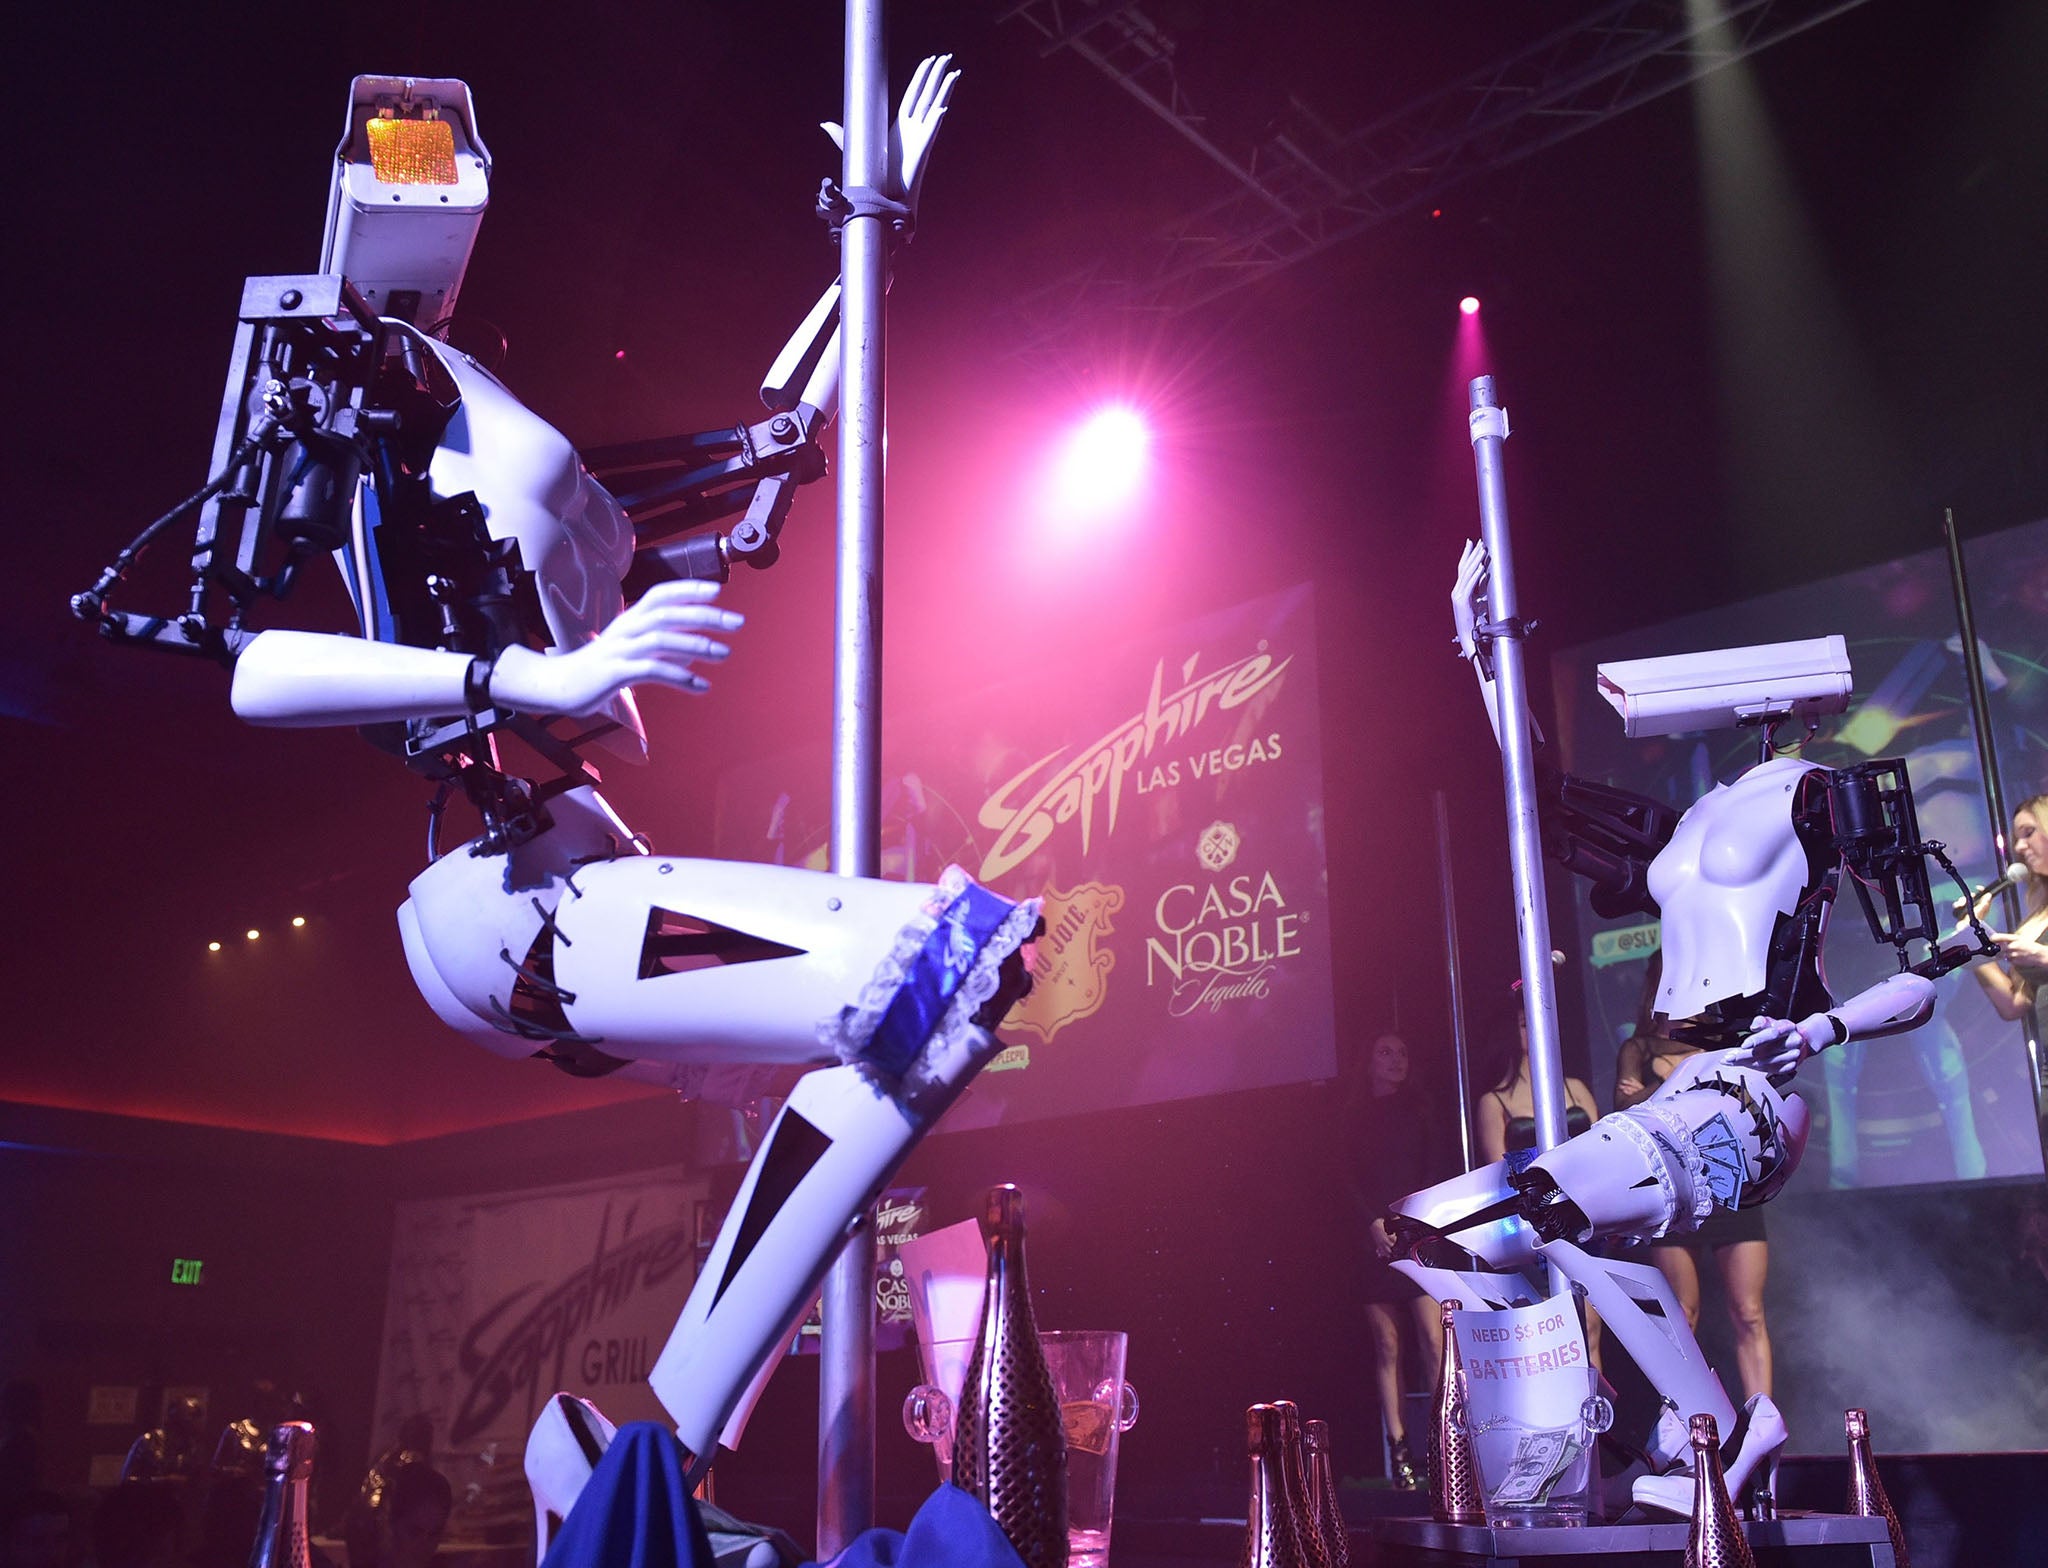 One of the shows more shocking presentations - stripper robots performed at the Sapphire Gentleman's Club on the sidelines of CES 2018